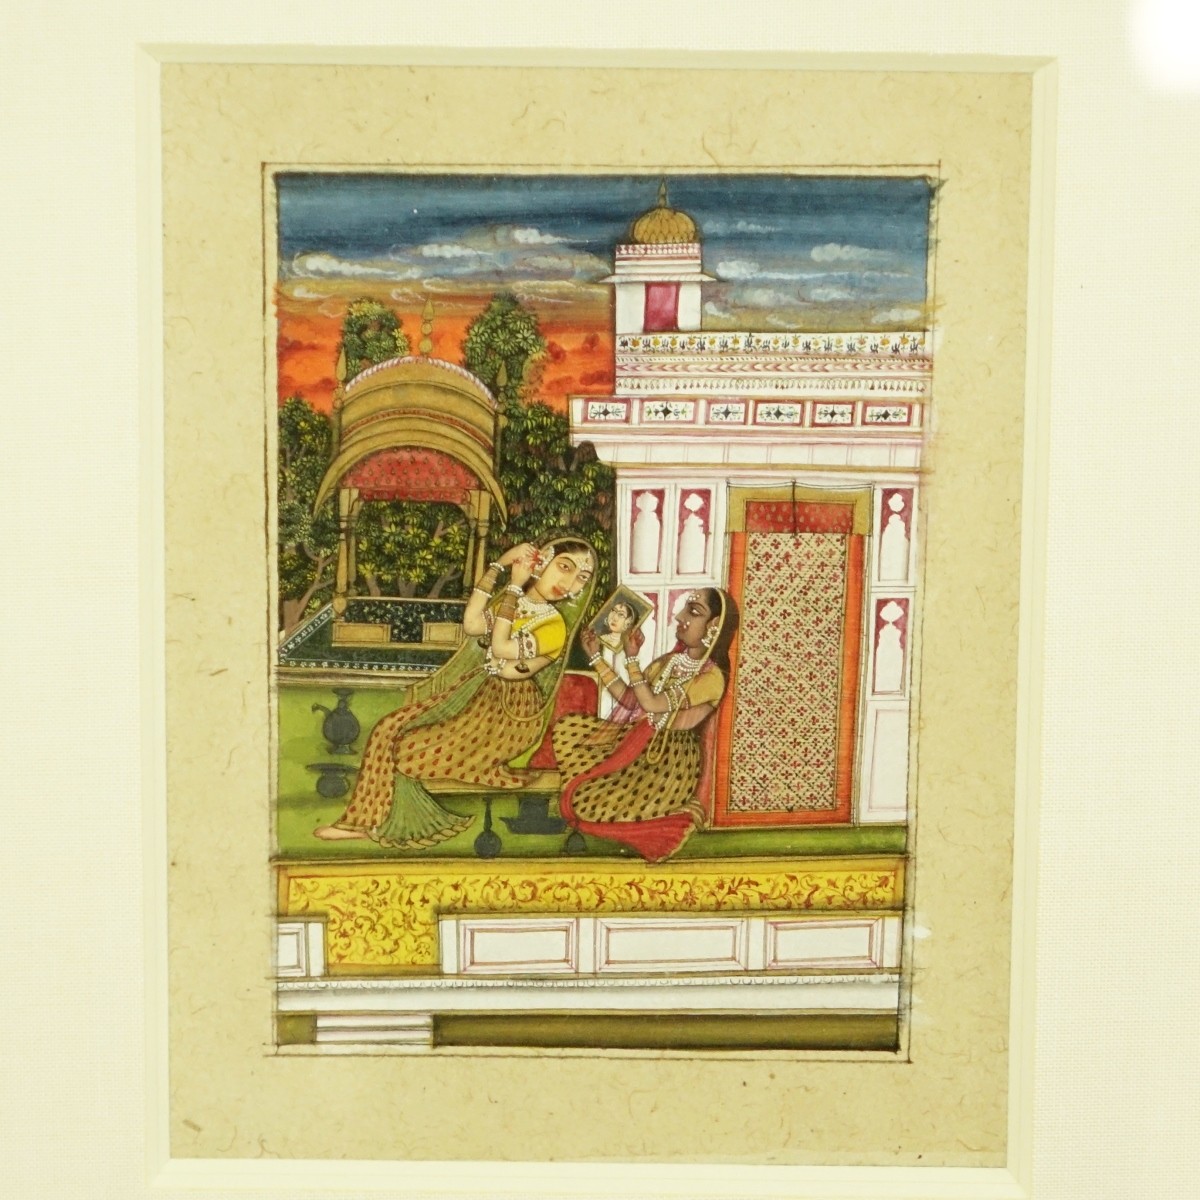 Pair of 18th Century Provincial Mughal Miniatures